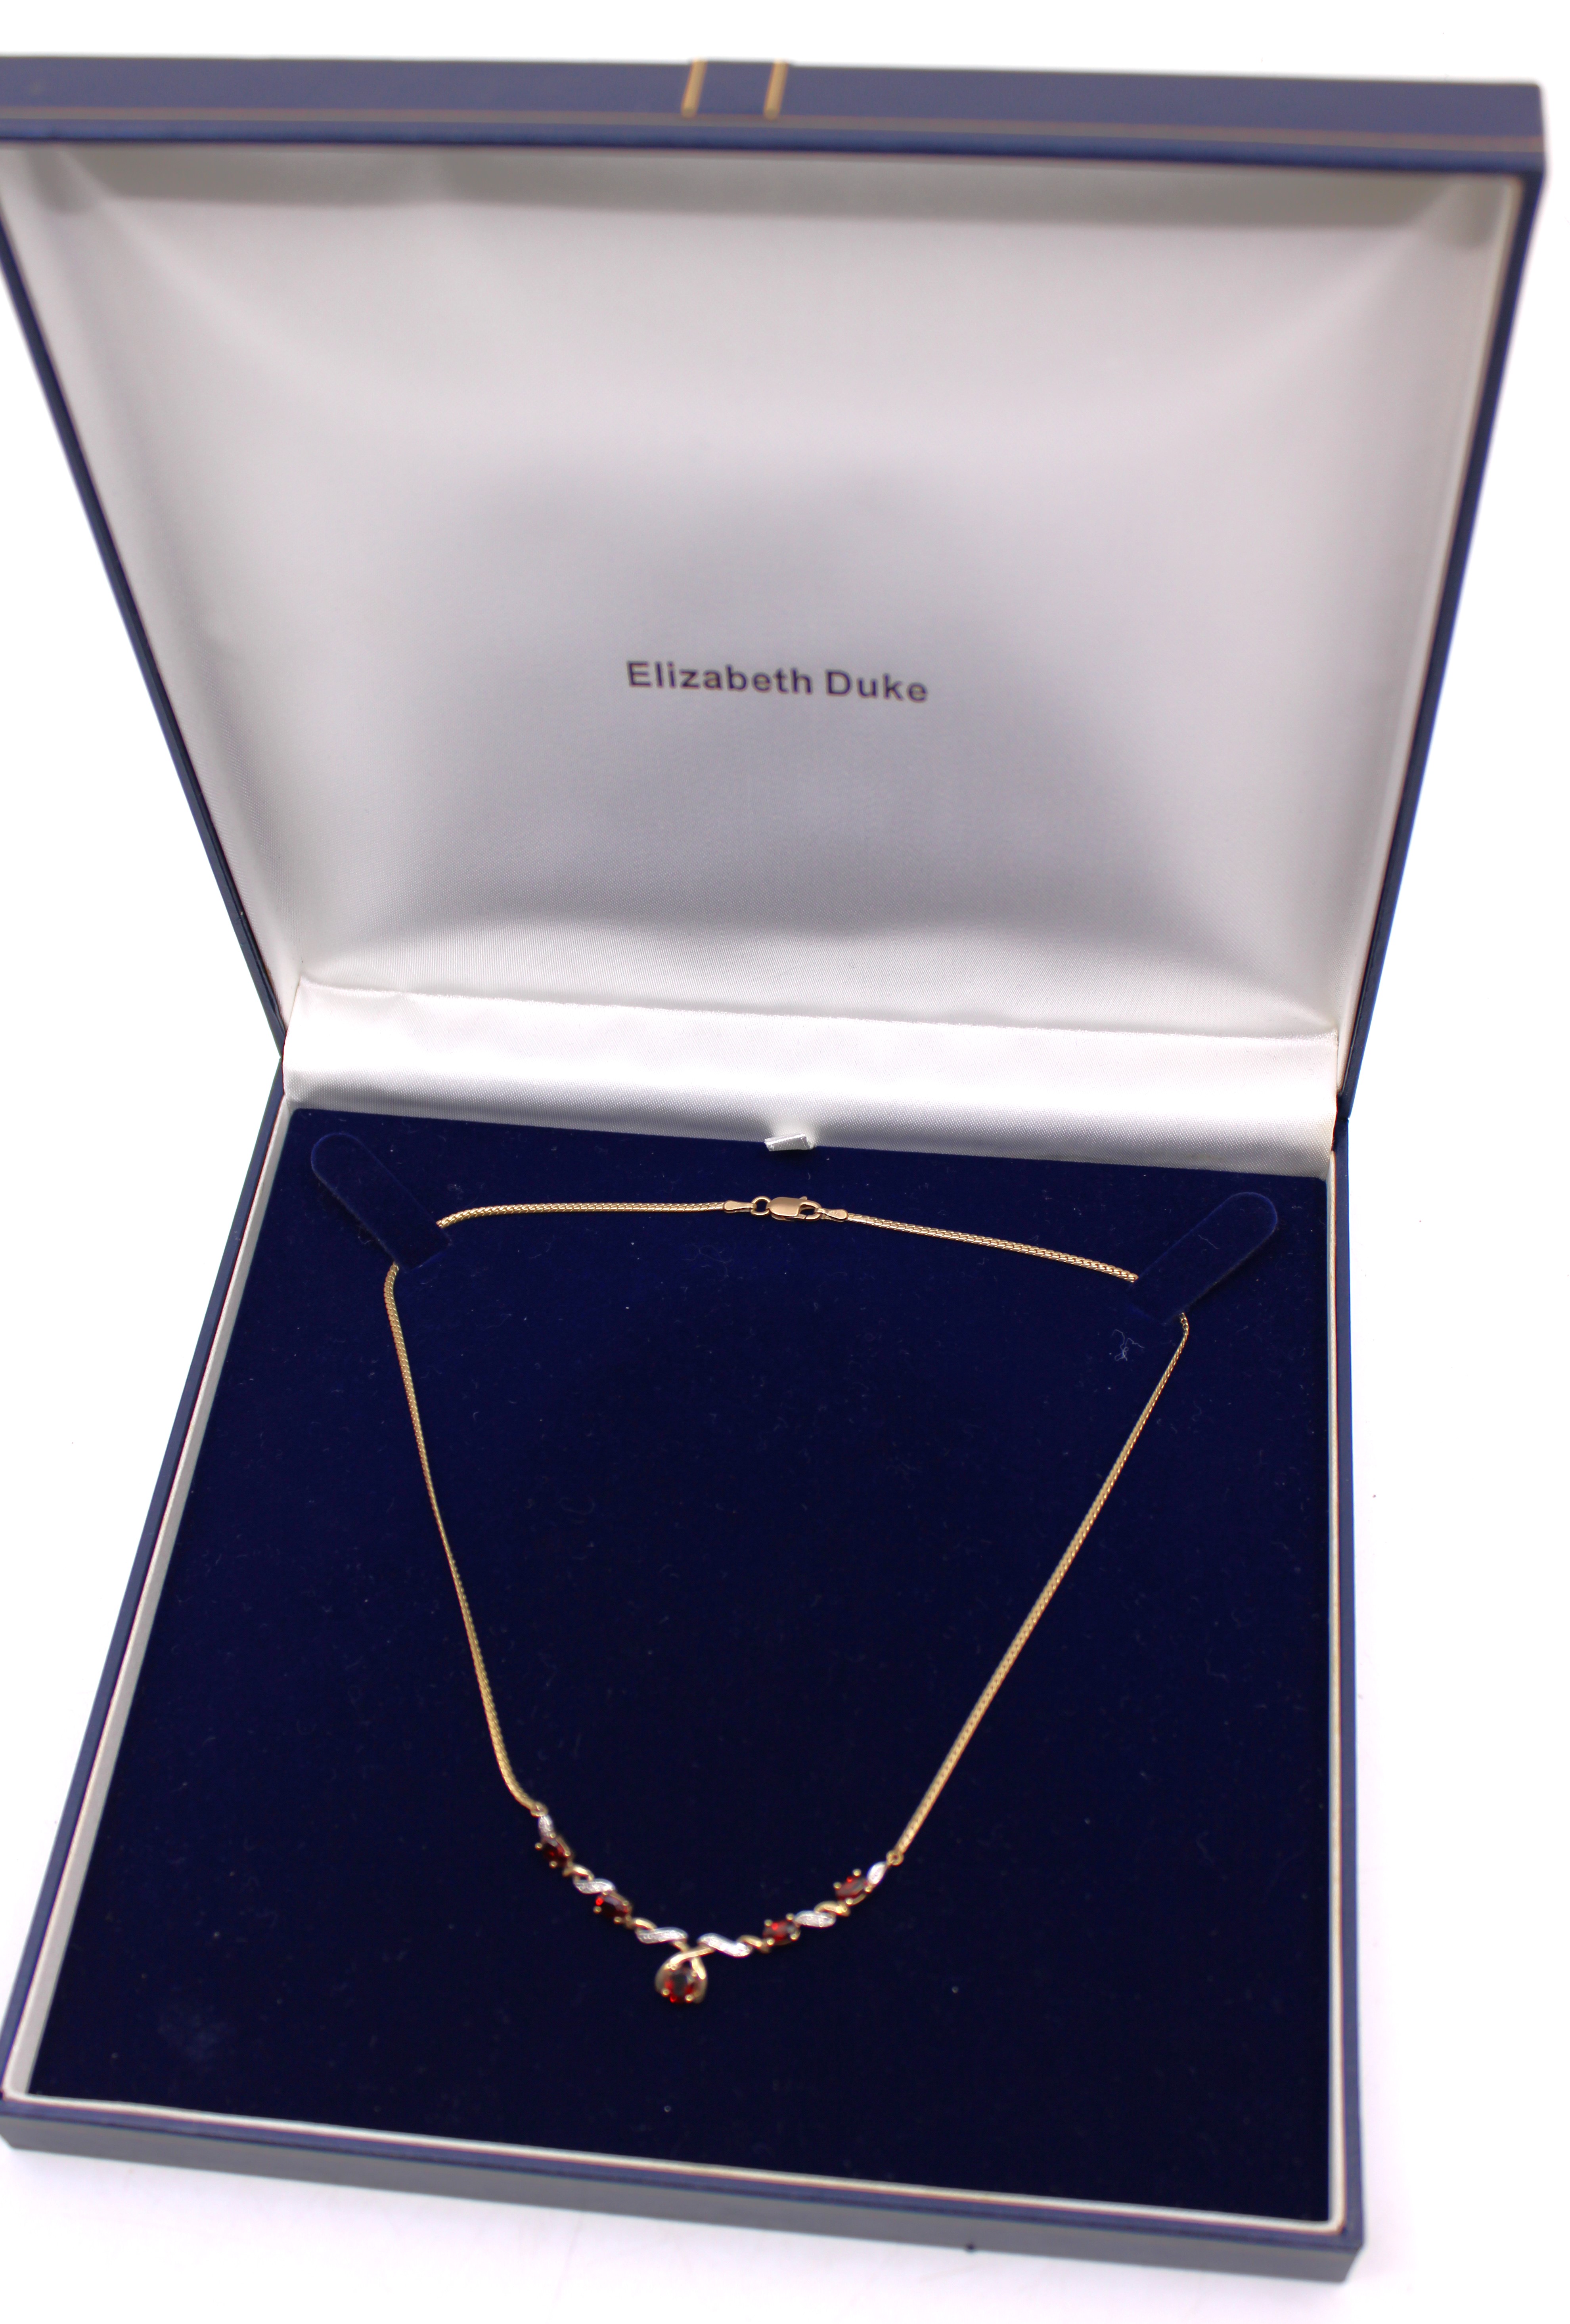 9ct Gold Garnet & Diamond Necklace.  The Necklace contains five Oval Brilliant Cut Garnets.  The - Image 3 of 3